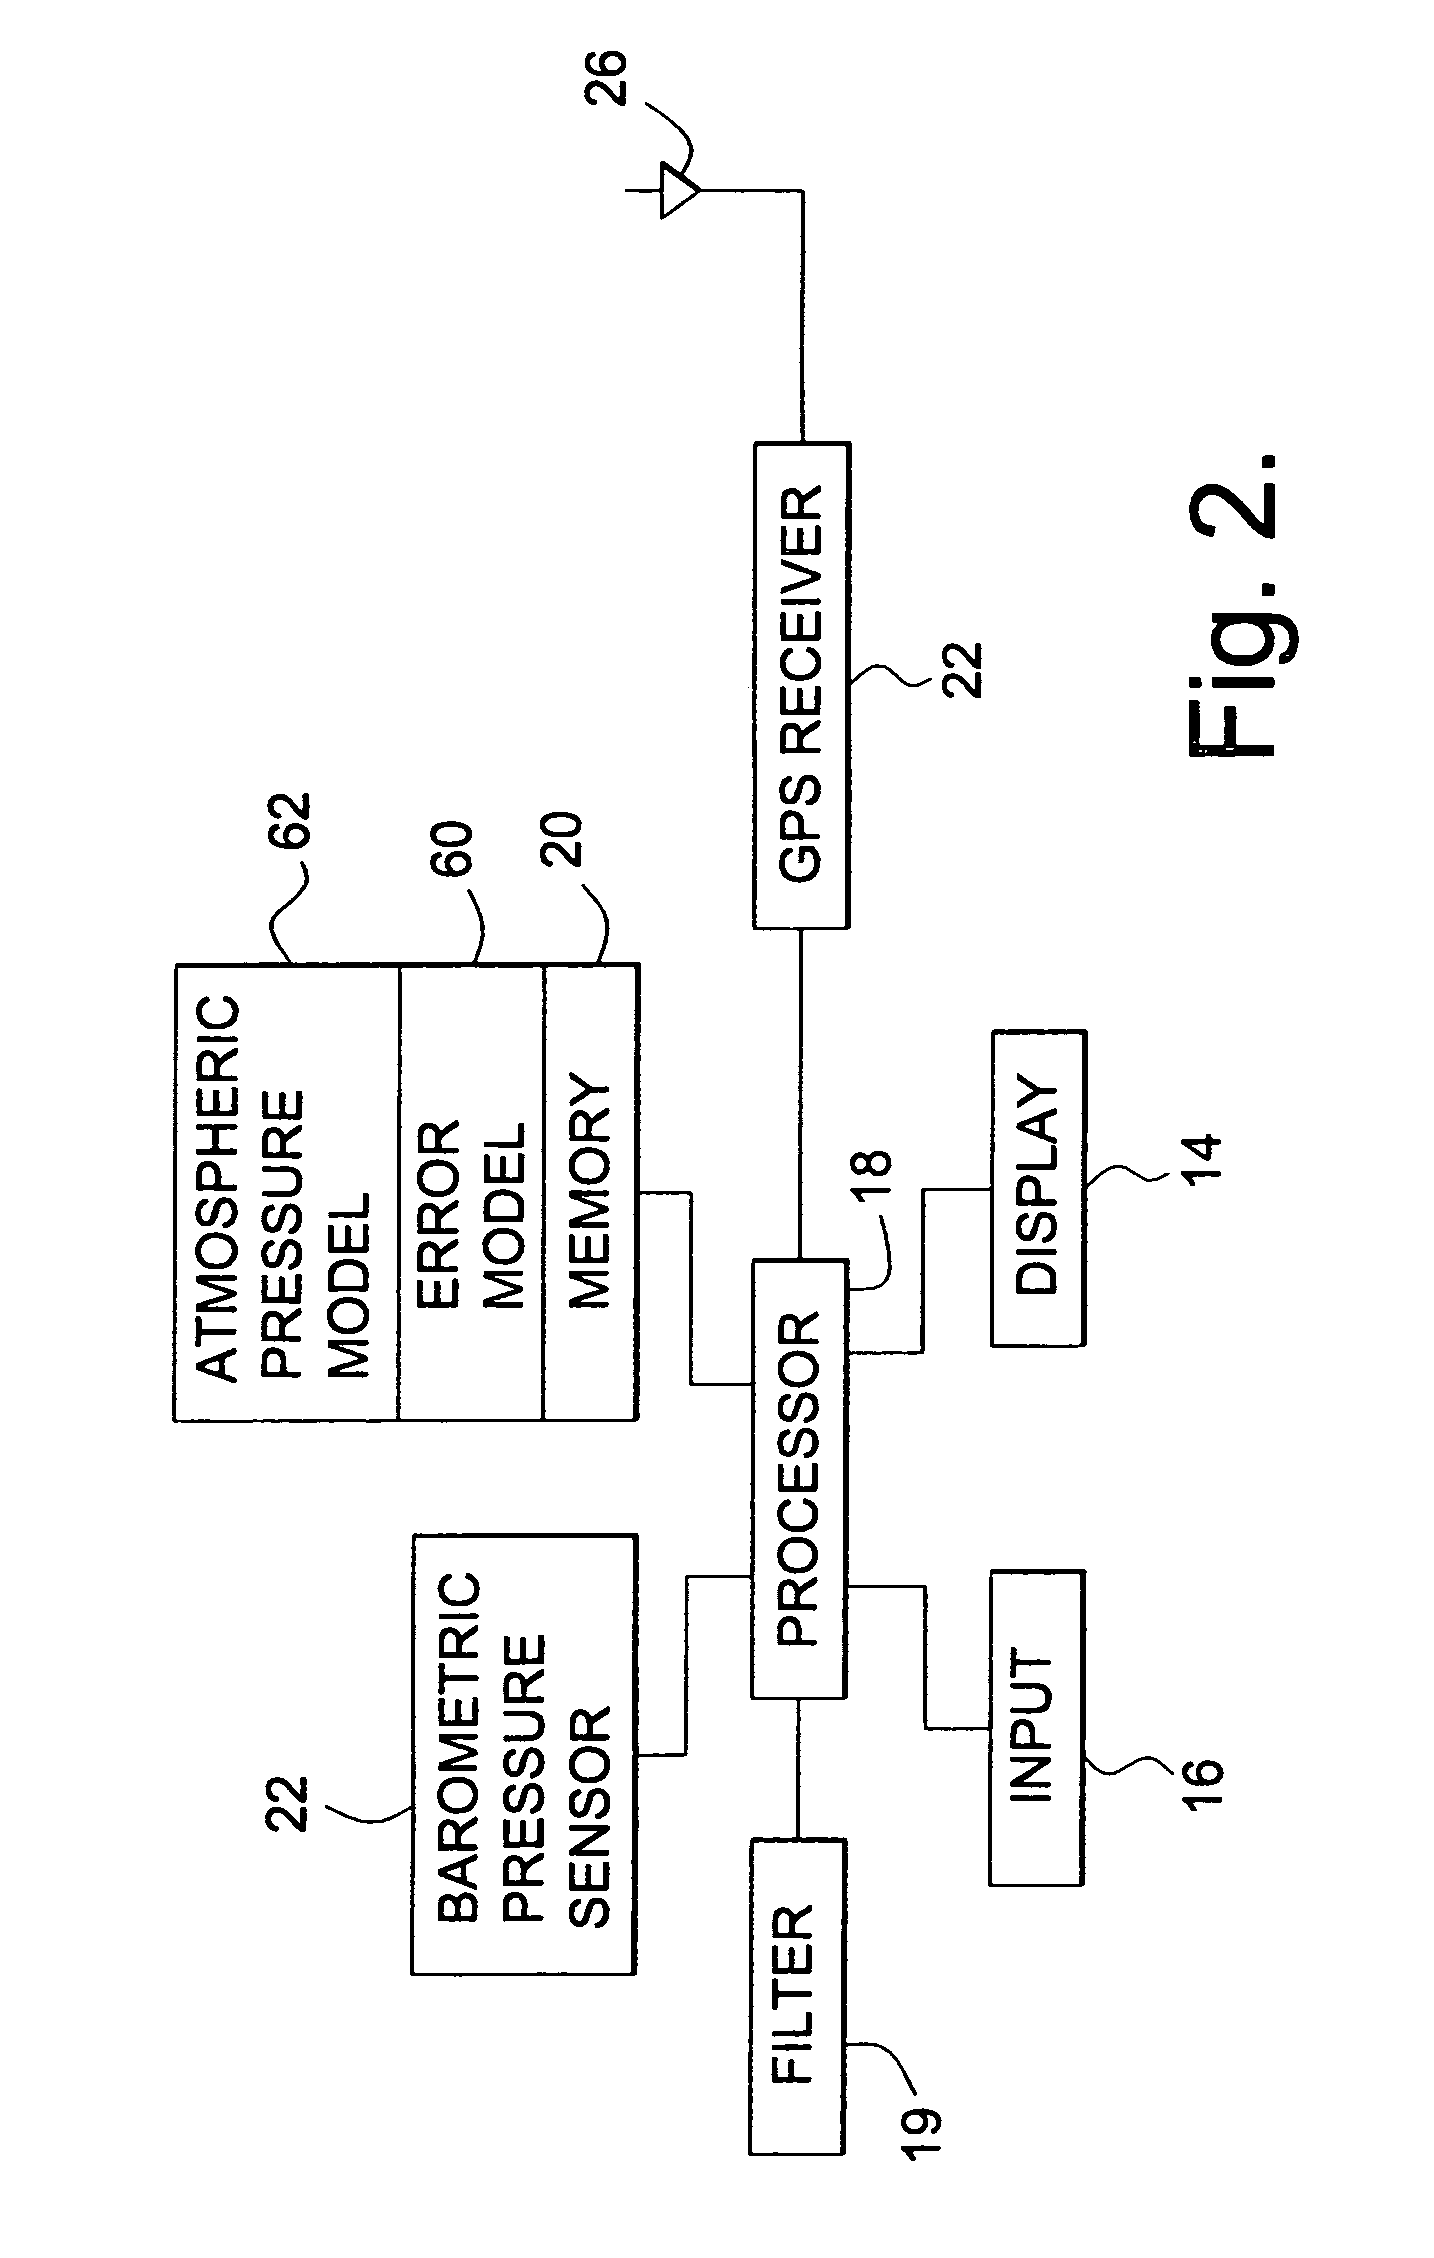 Method and apparatus for calculating altitude based on barometric and GPS measurements